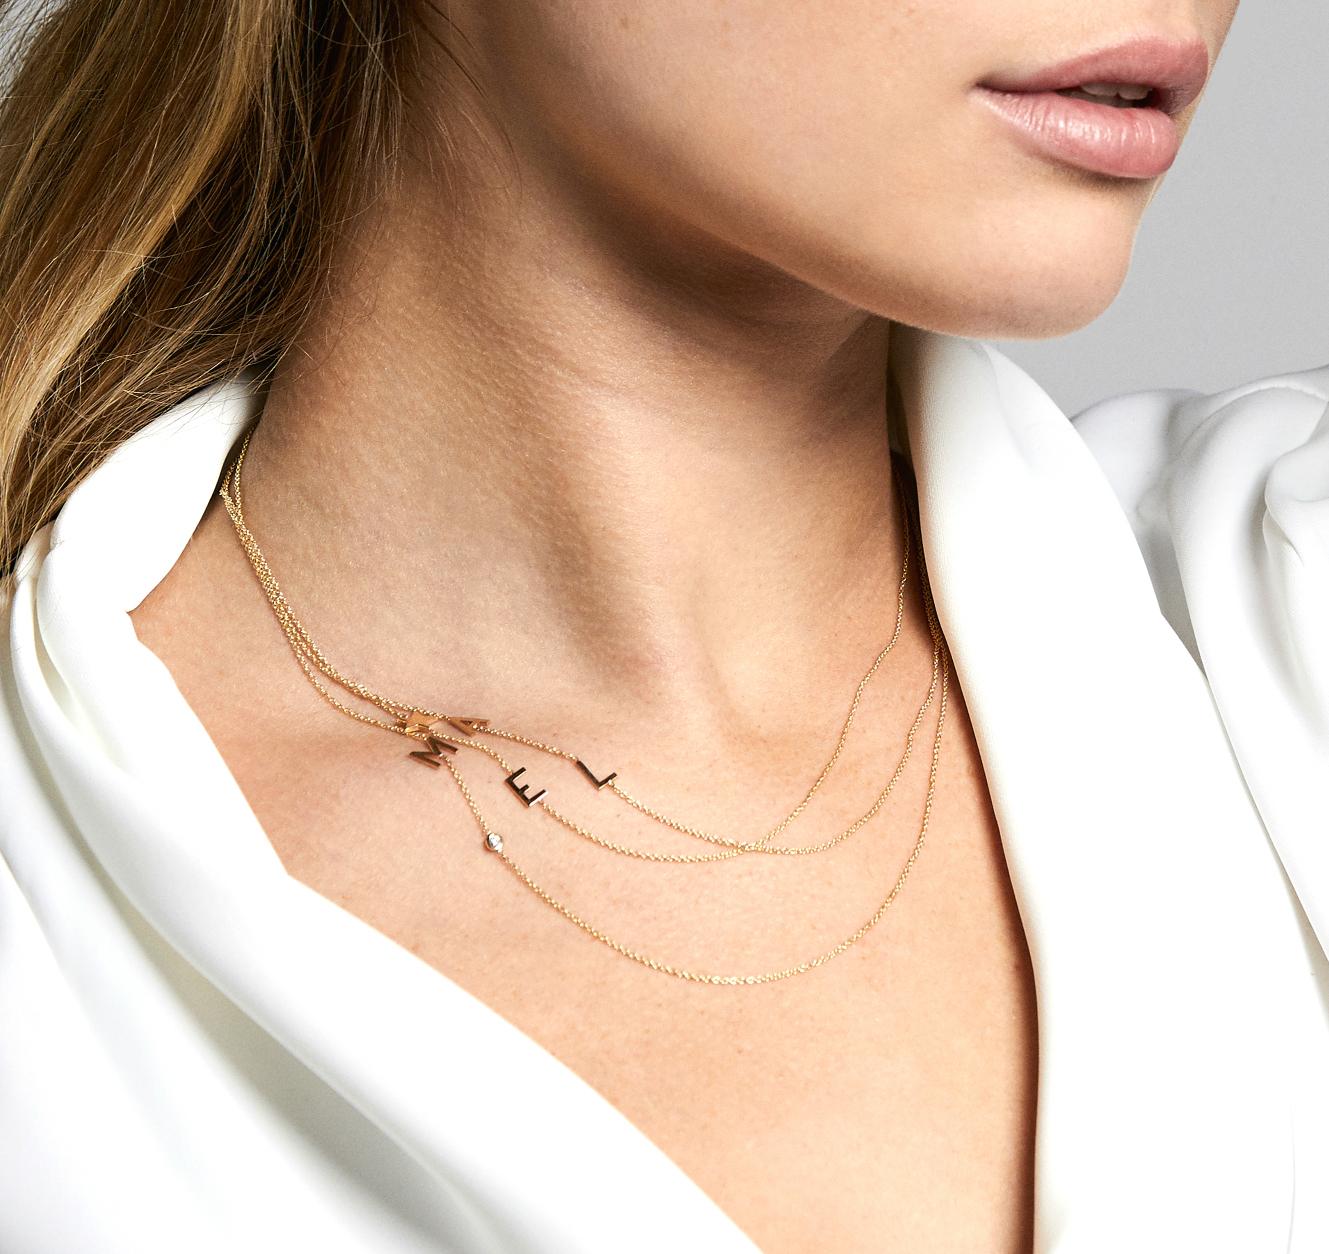 Timeless 14k solid gold asymmetrical initial on a dainty cable link chain necklace, available in 14k yellow gold. It makes for the perfect necklace with a modern twist having the initial laying sideways, wear it with your initial or your loved